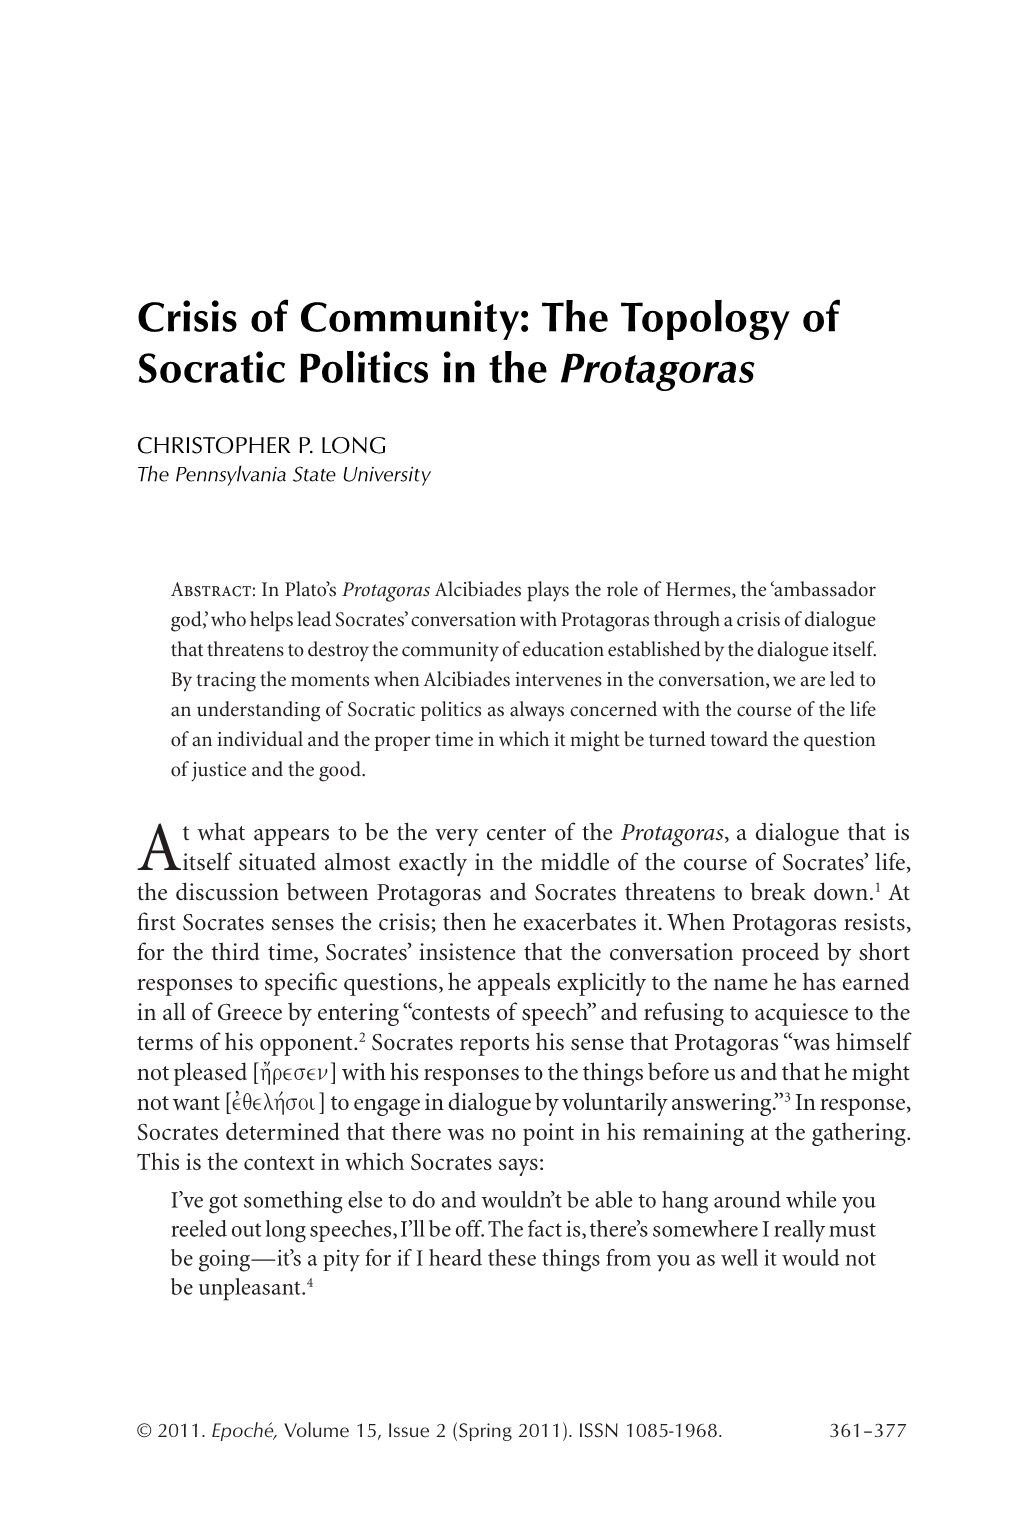 Crisis of Community: the Topology of Socratic Politics in the Protagoras